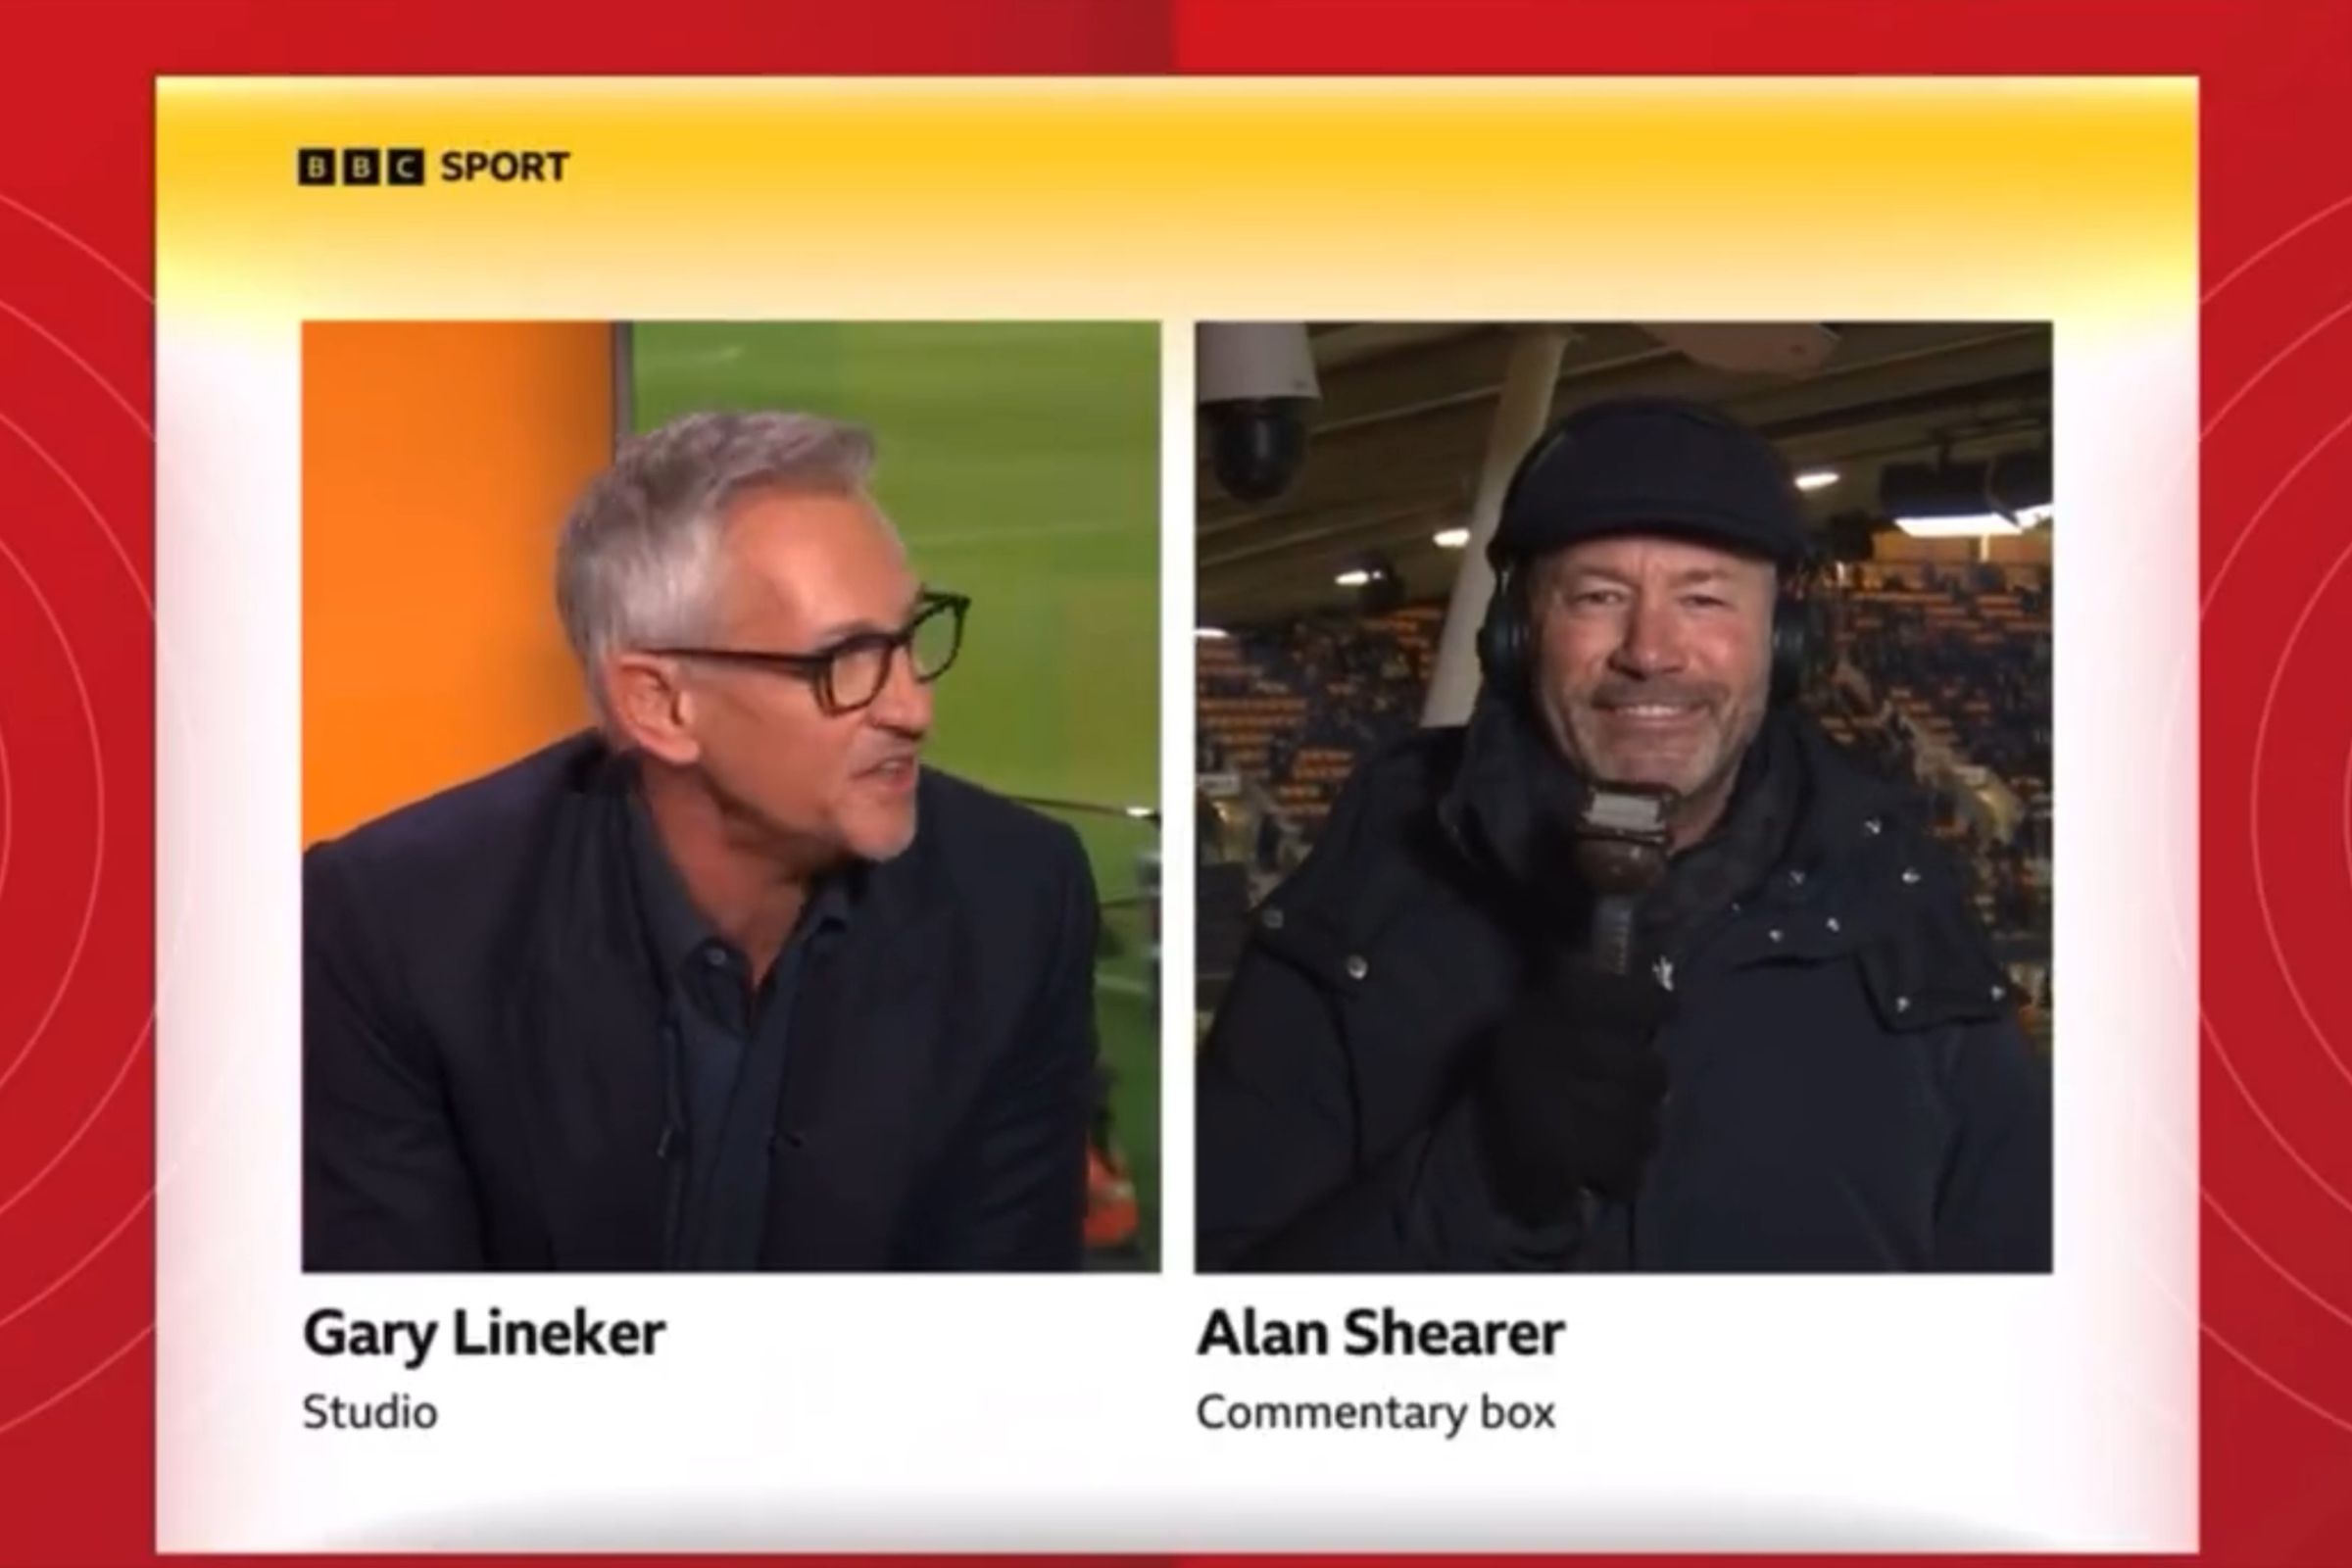 Gary Lineker and Alan Shearer appear live on BBC Sport’s coverage of an FA Cup football match.